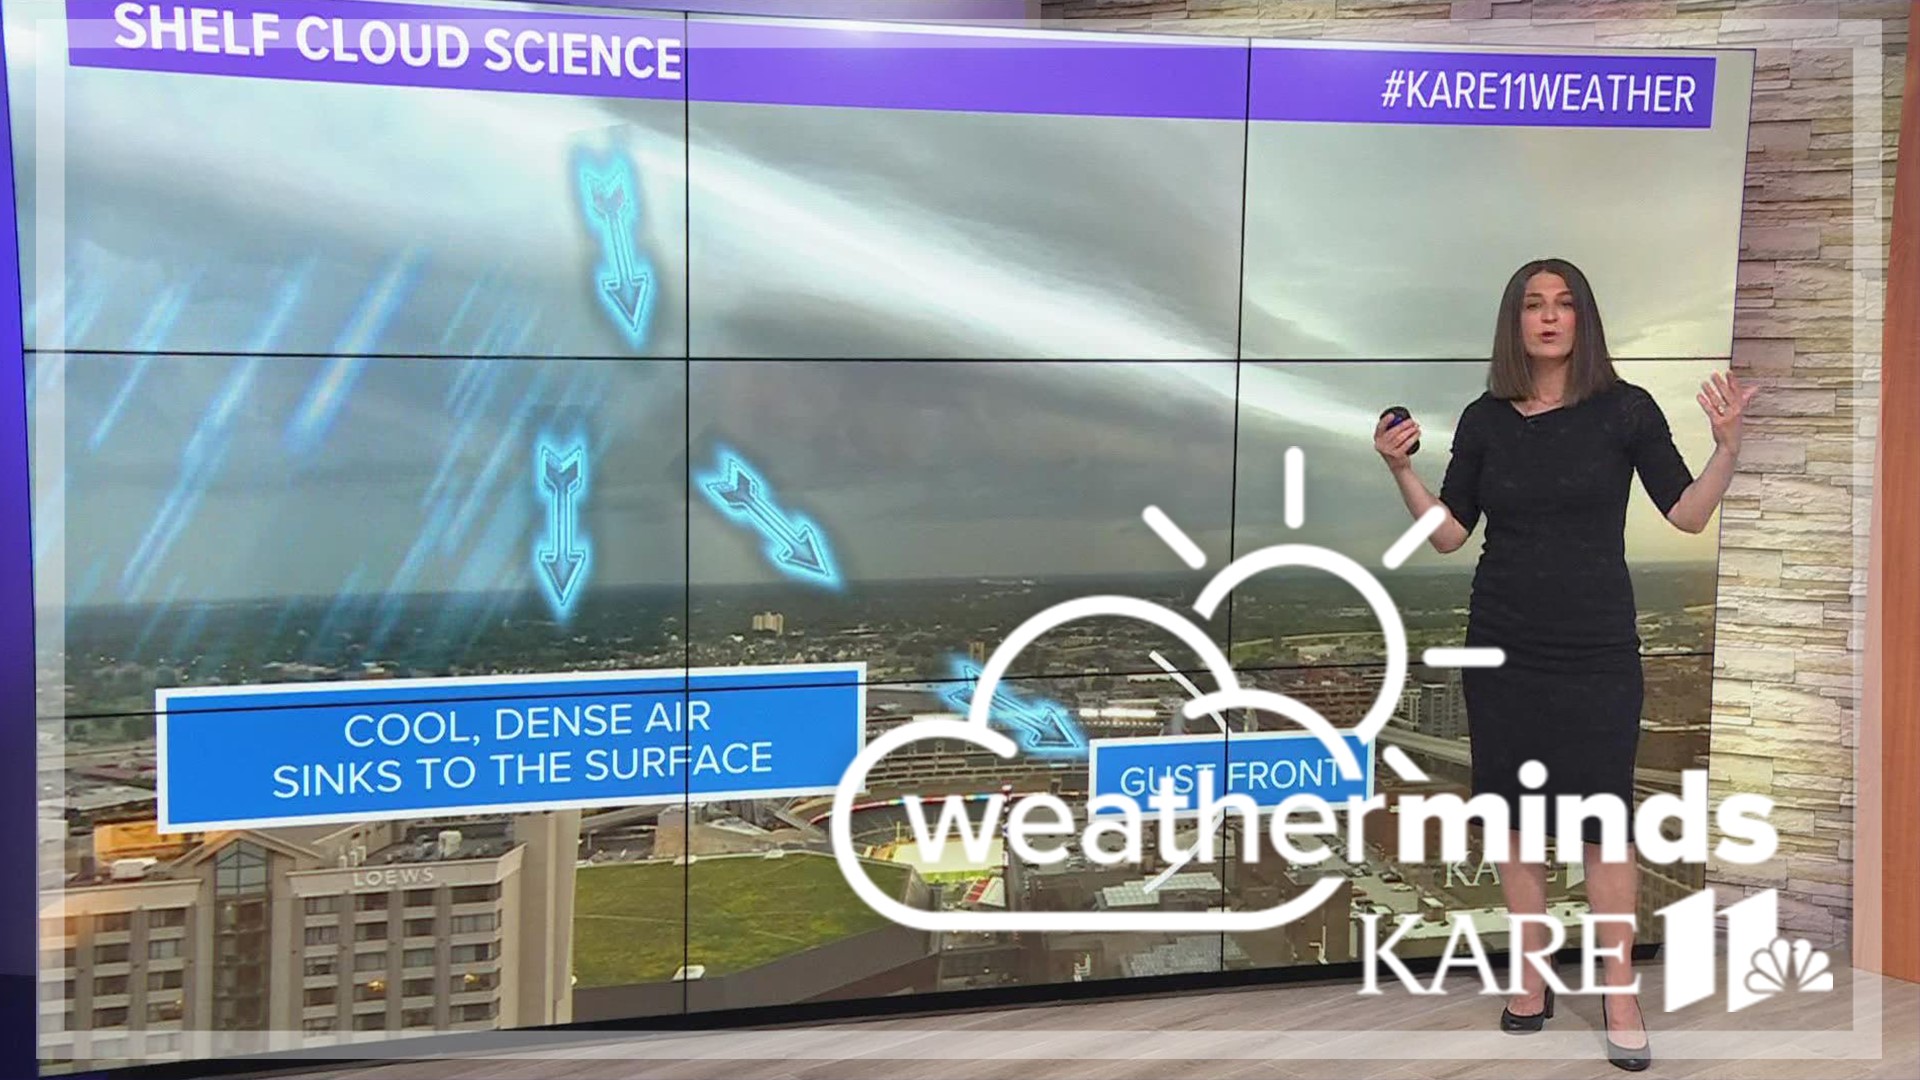 KARE 11 Meteorologist Laura Betker takes a look at some viewer photos to explain how shelf clouds form.